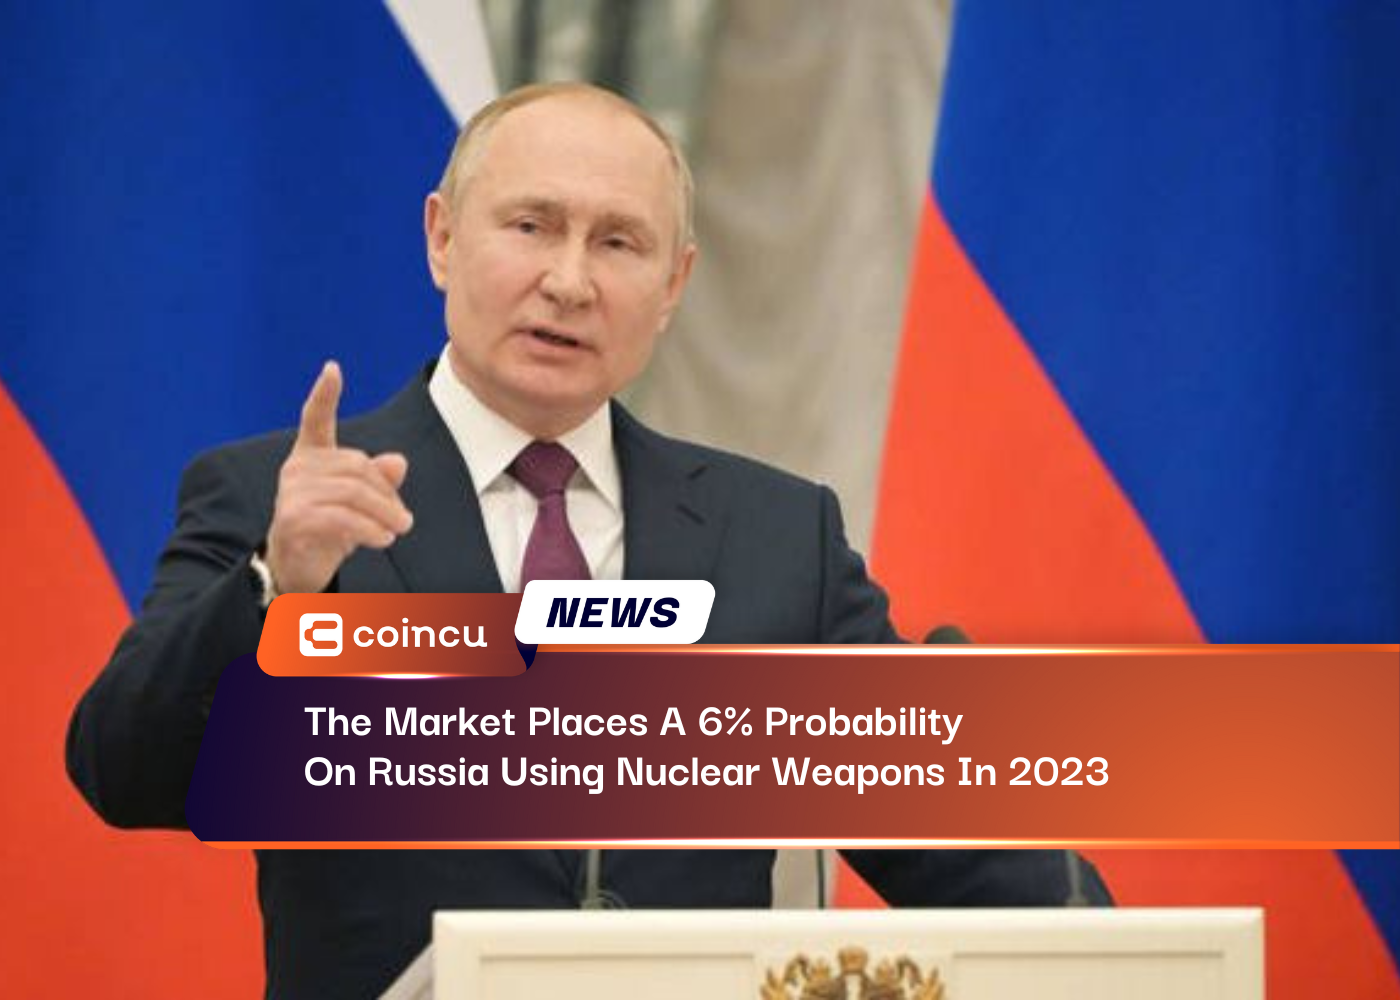 The Market Places A 6% Probability On Russia Using Nuclear Weapons In 2023